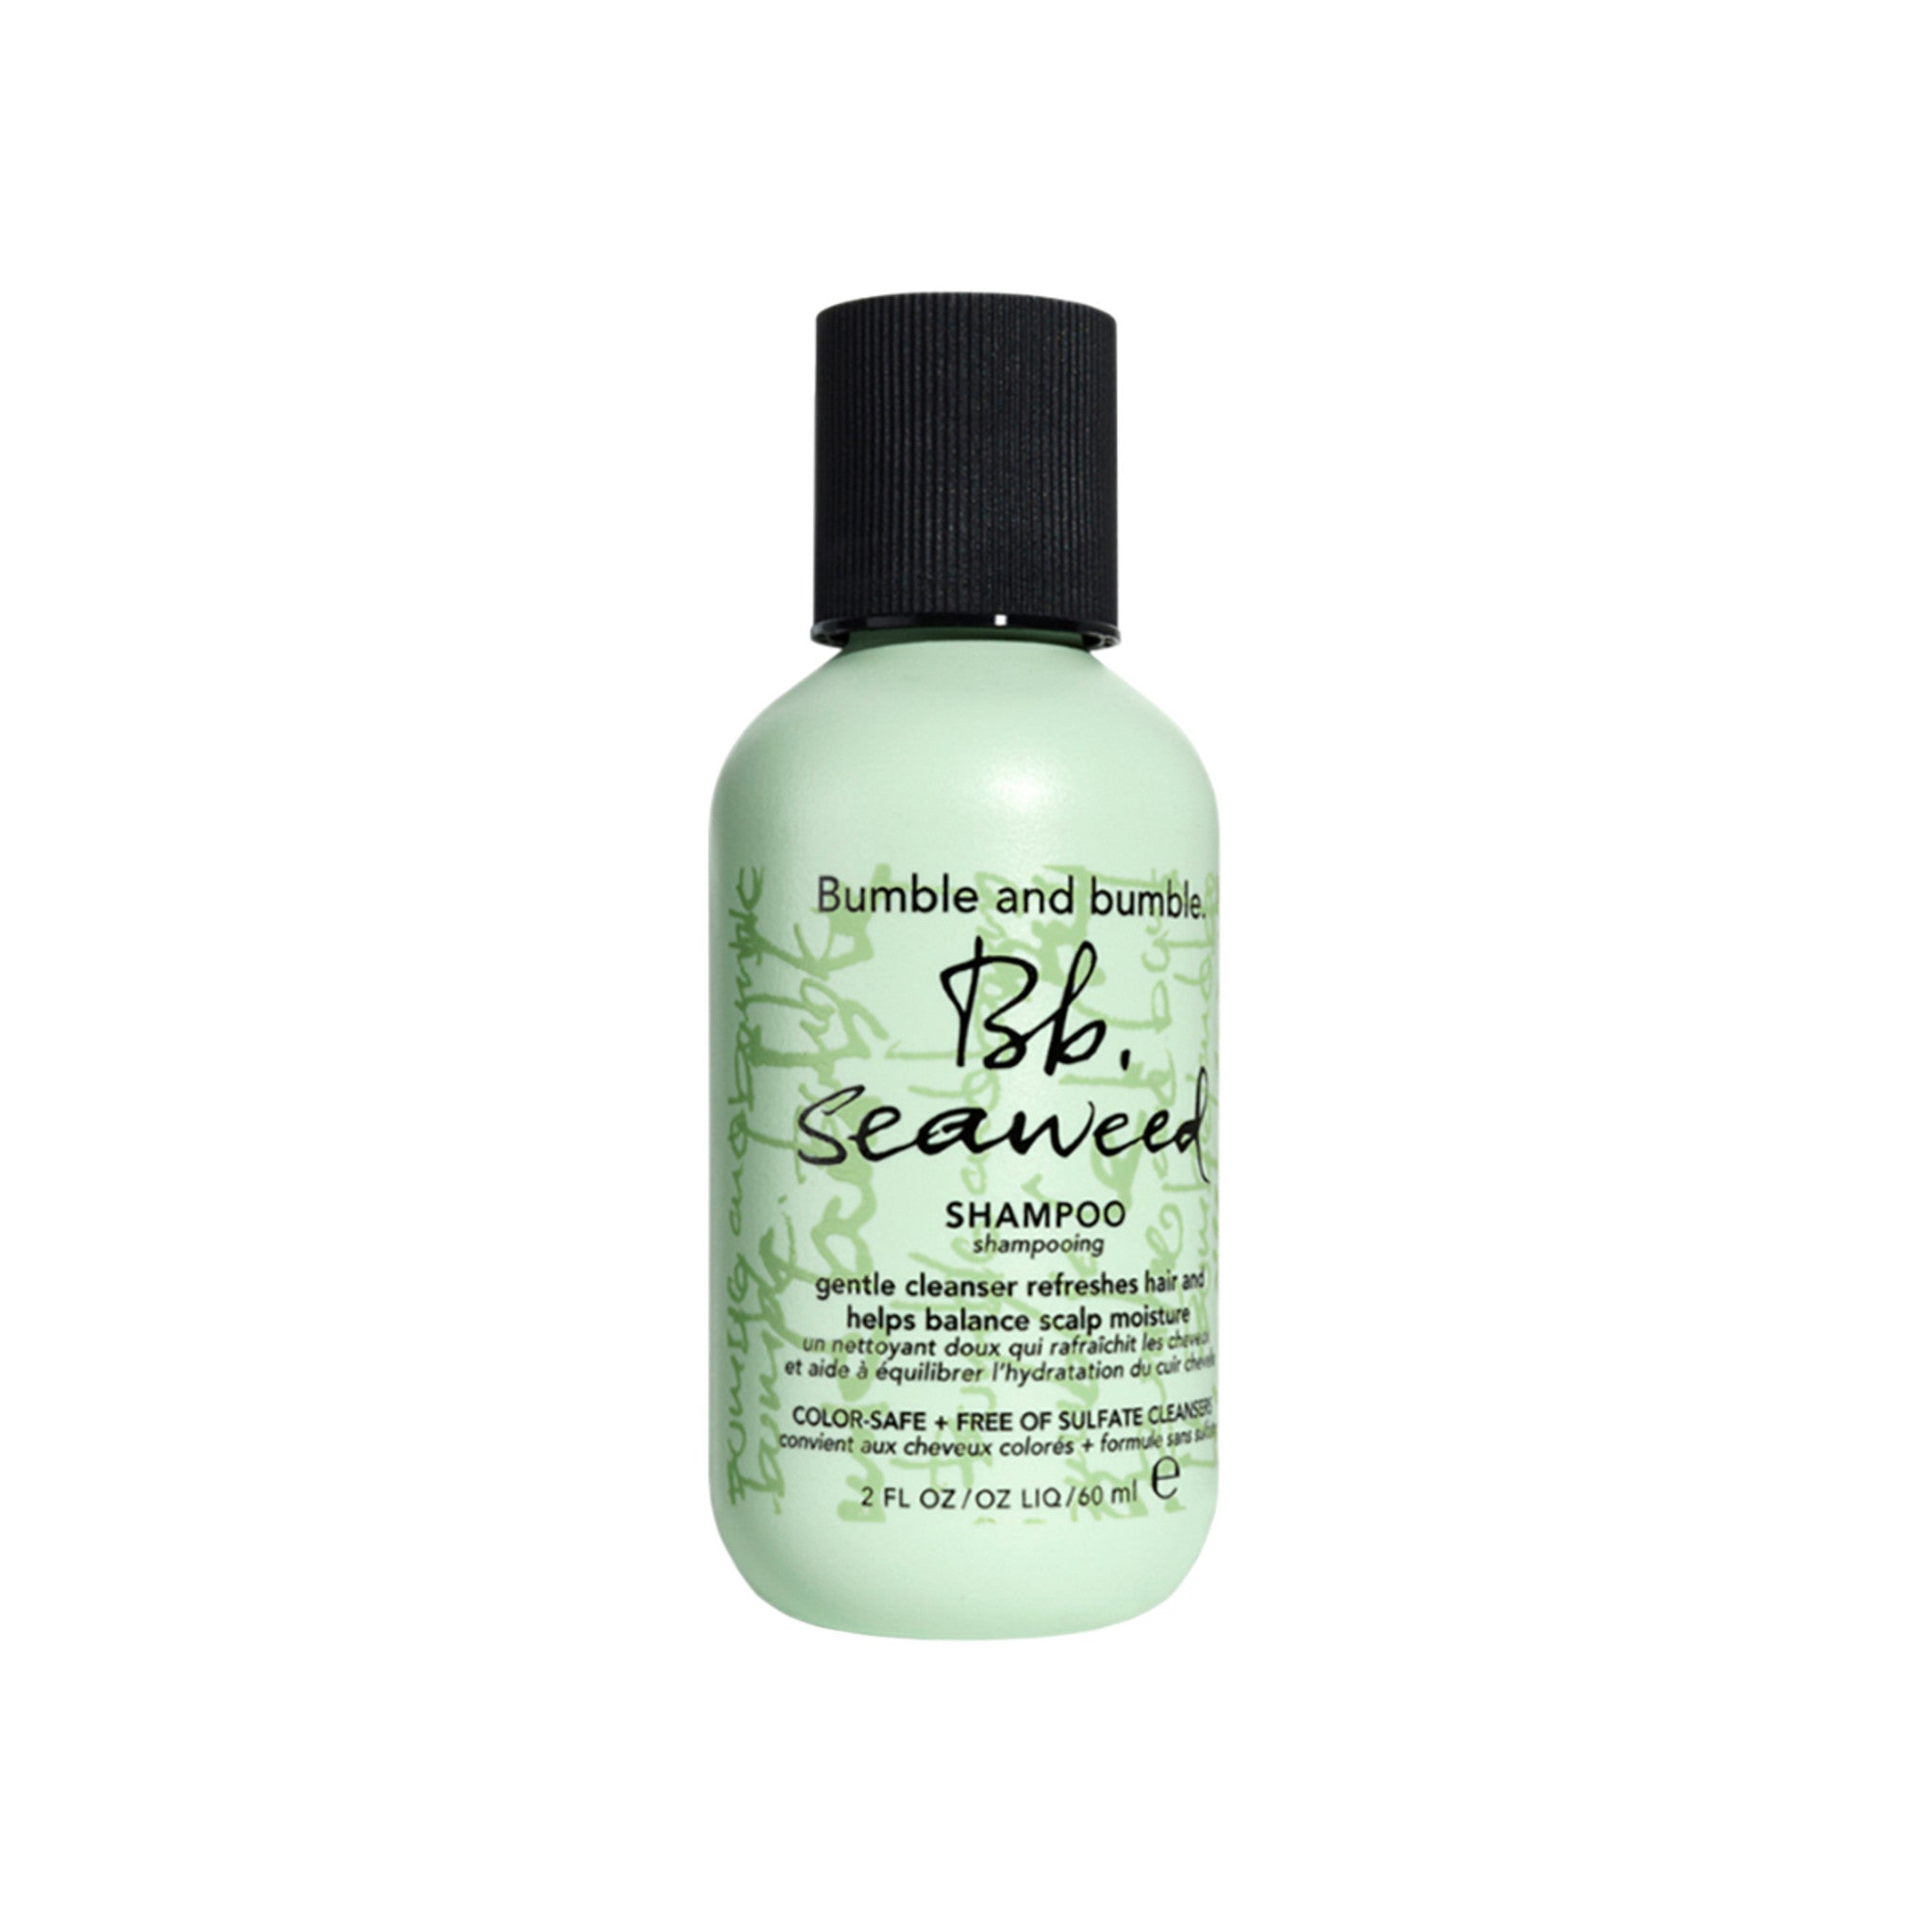 Bumble and Bumble Surf Foam Spray Blow Dry – bluemercury